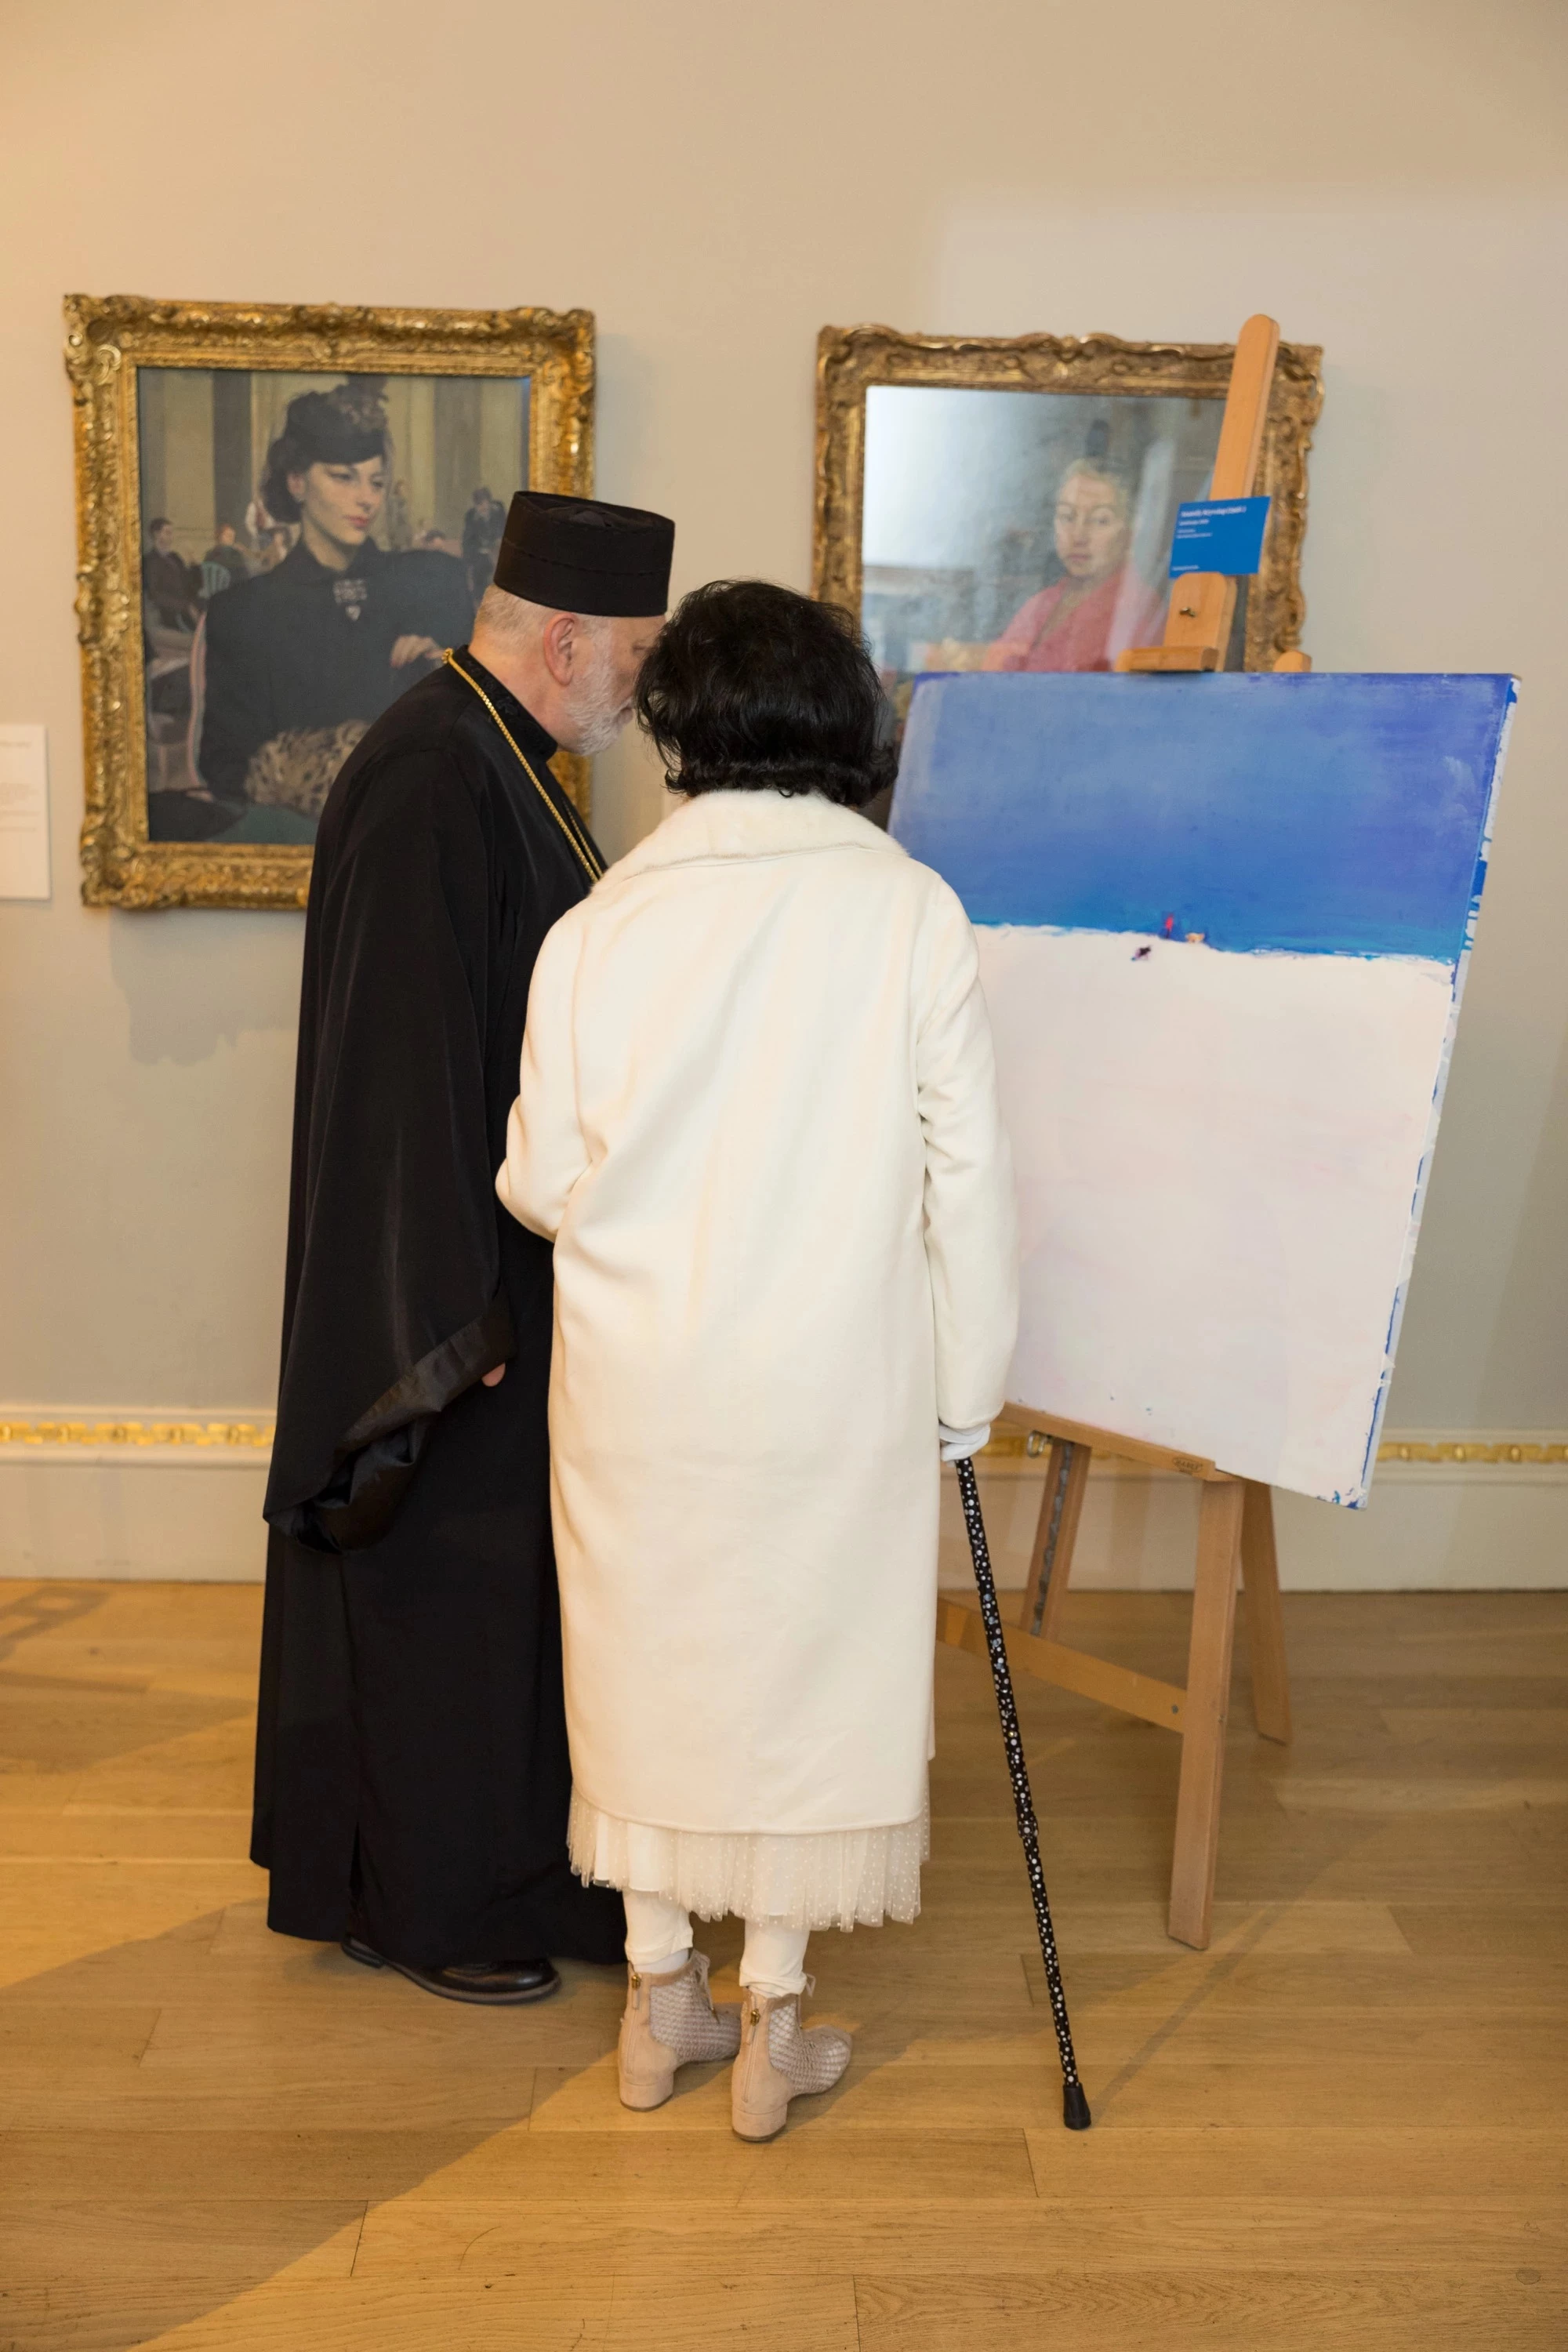 The Bishop of the Ukrainian Catholic Diocese of the Holy Family with a seat in London, Kenneth Nowakovsky and Bianca Jagger. Auction at the Royal Academy of Arts, London (Photo by Marcus Dawes)